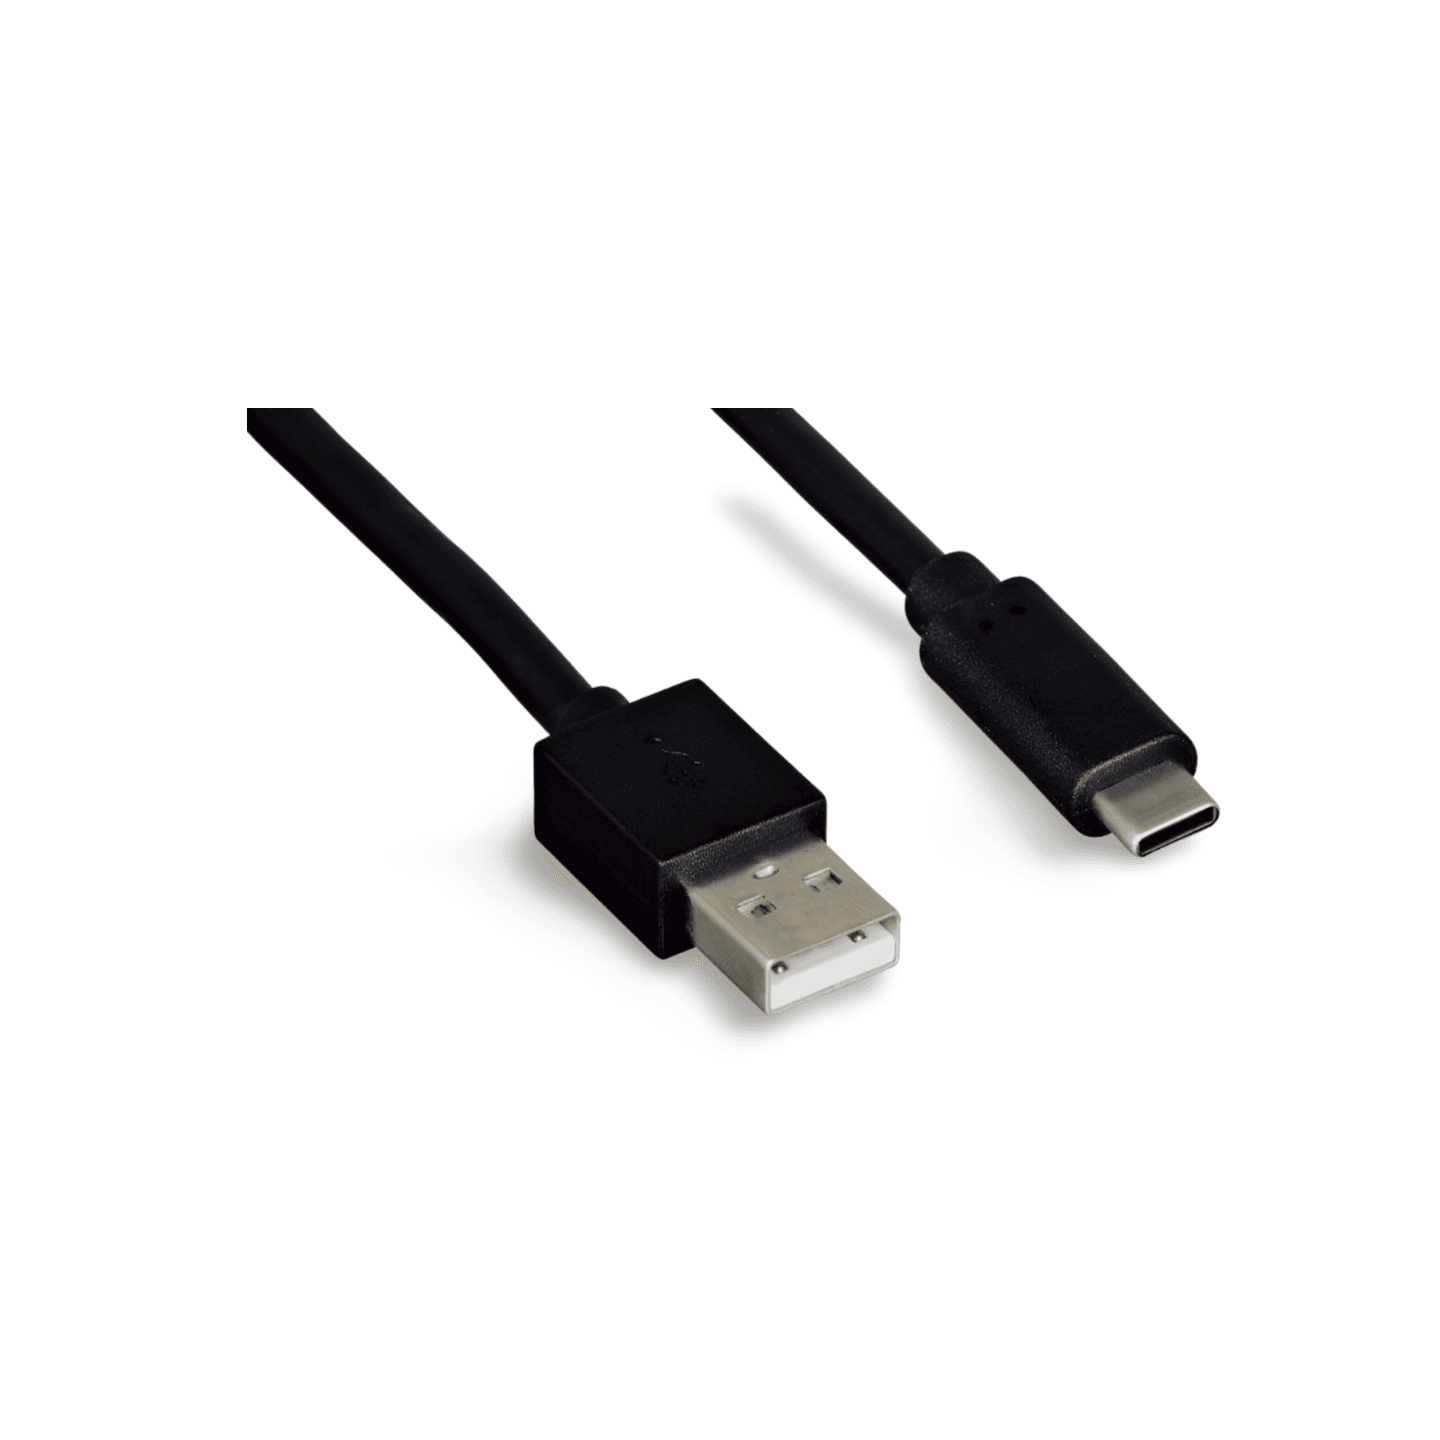 6ft USB 2.0 USB Cable Type A to Type C black